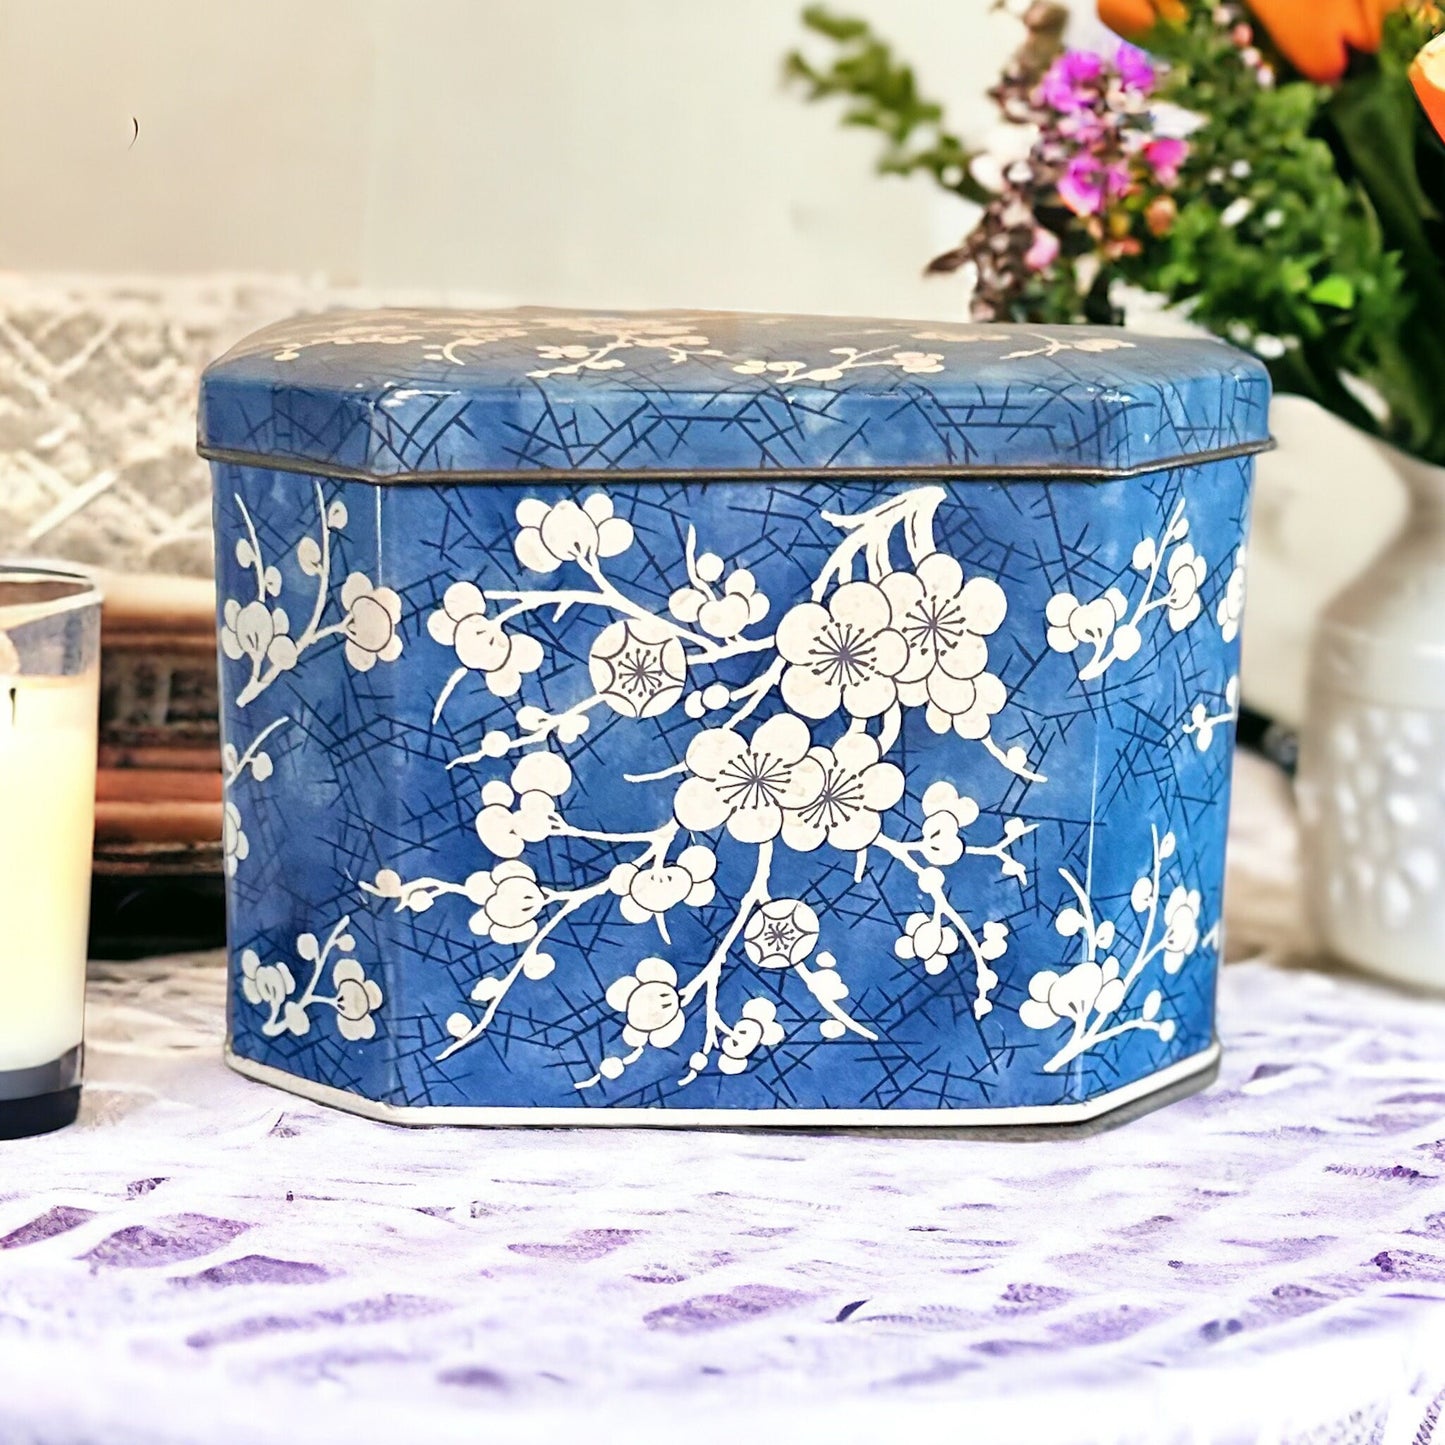 Scented Candle, Vintage Tins, Mothers Day Gifts, Gift for Wife